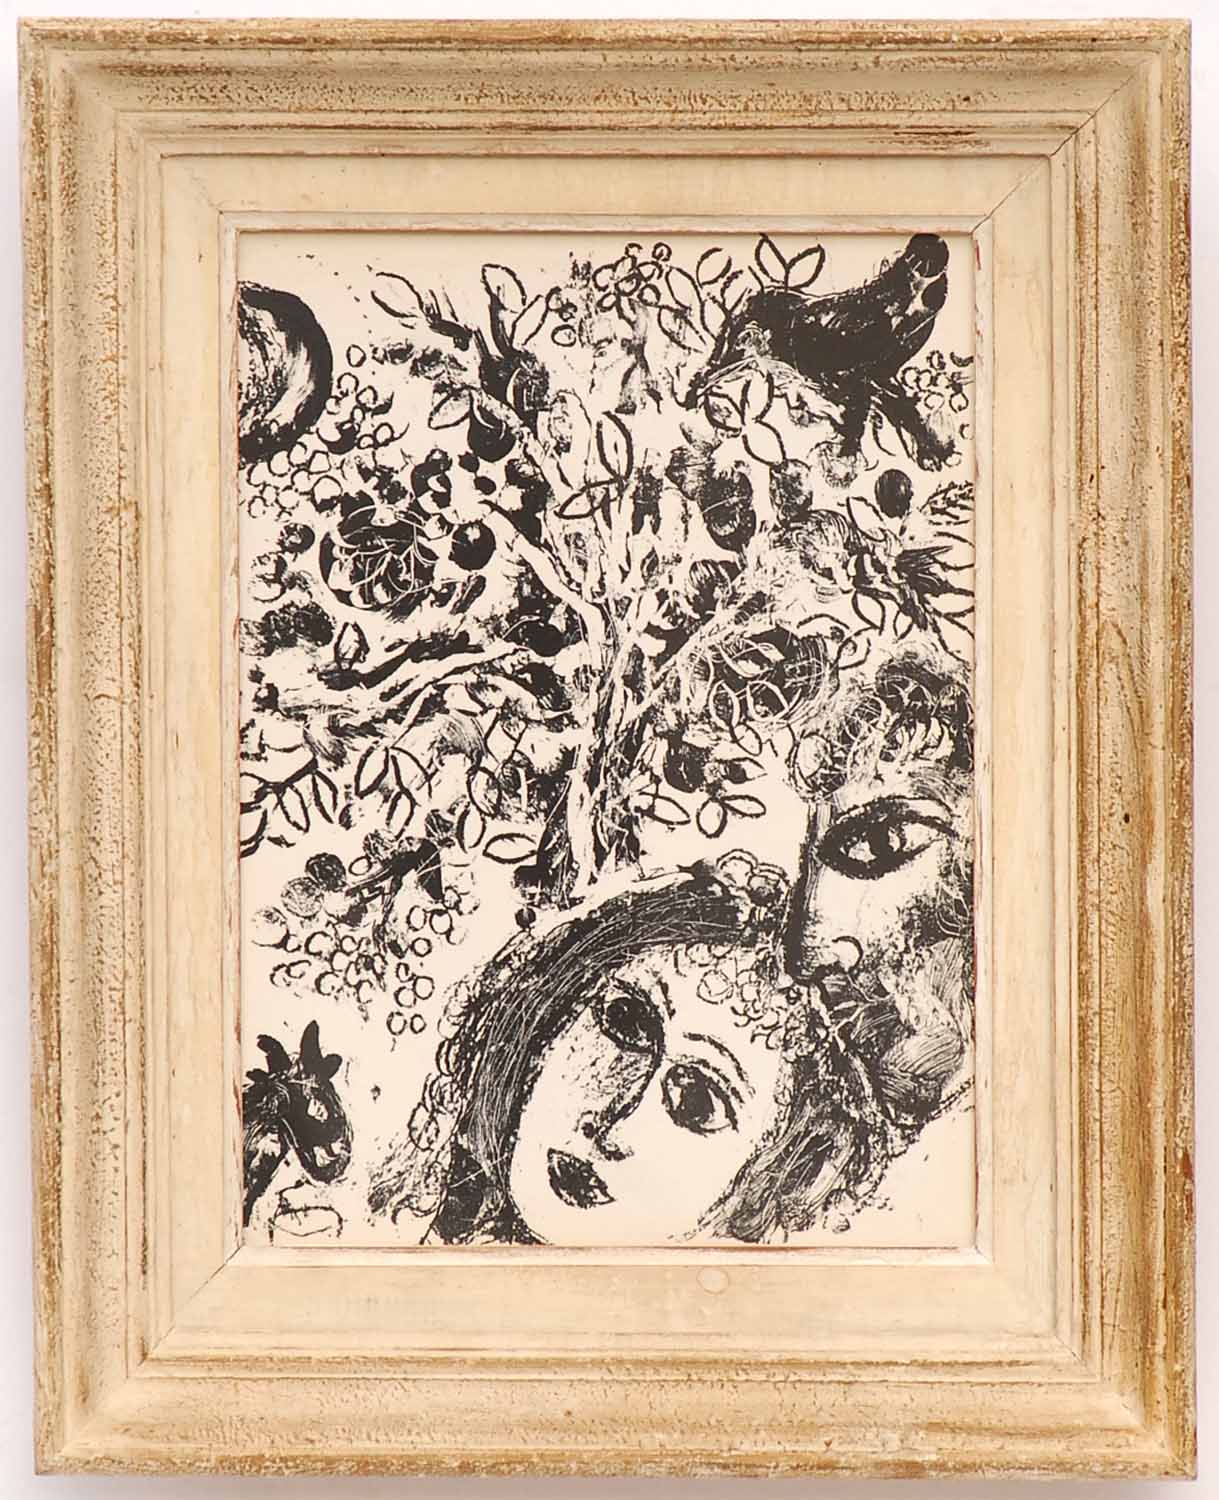 MARC CHAGALL 'Lovers', original lithograph, 1960 Mourlot ref 292, 31cm x 23cm, framed and glazed.